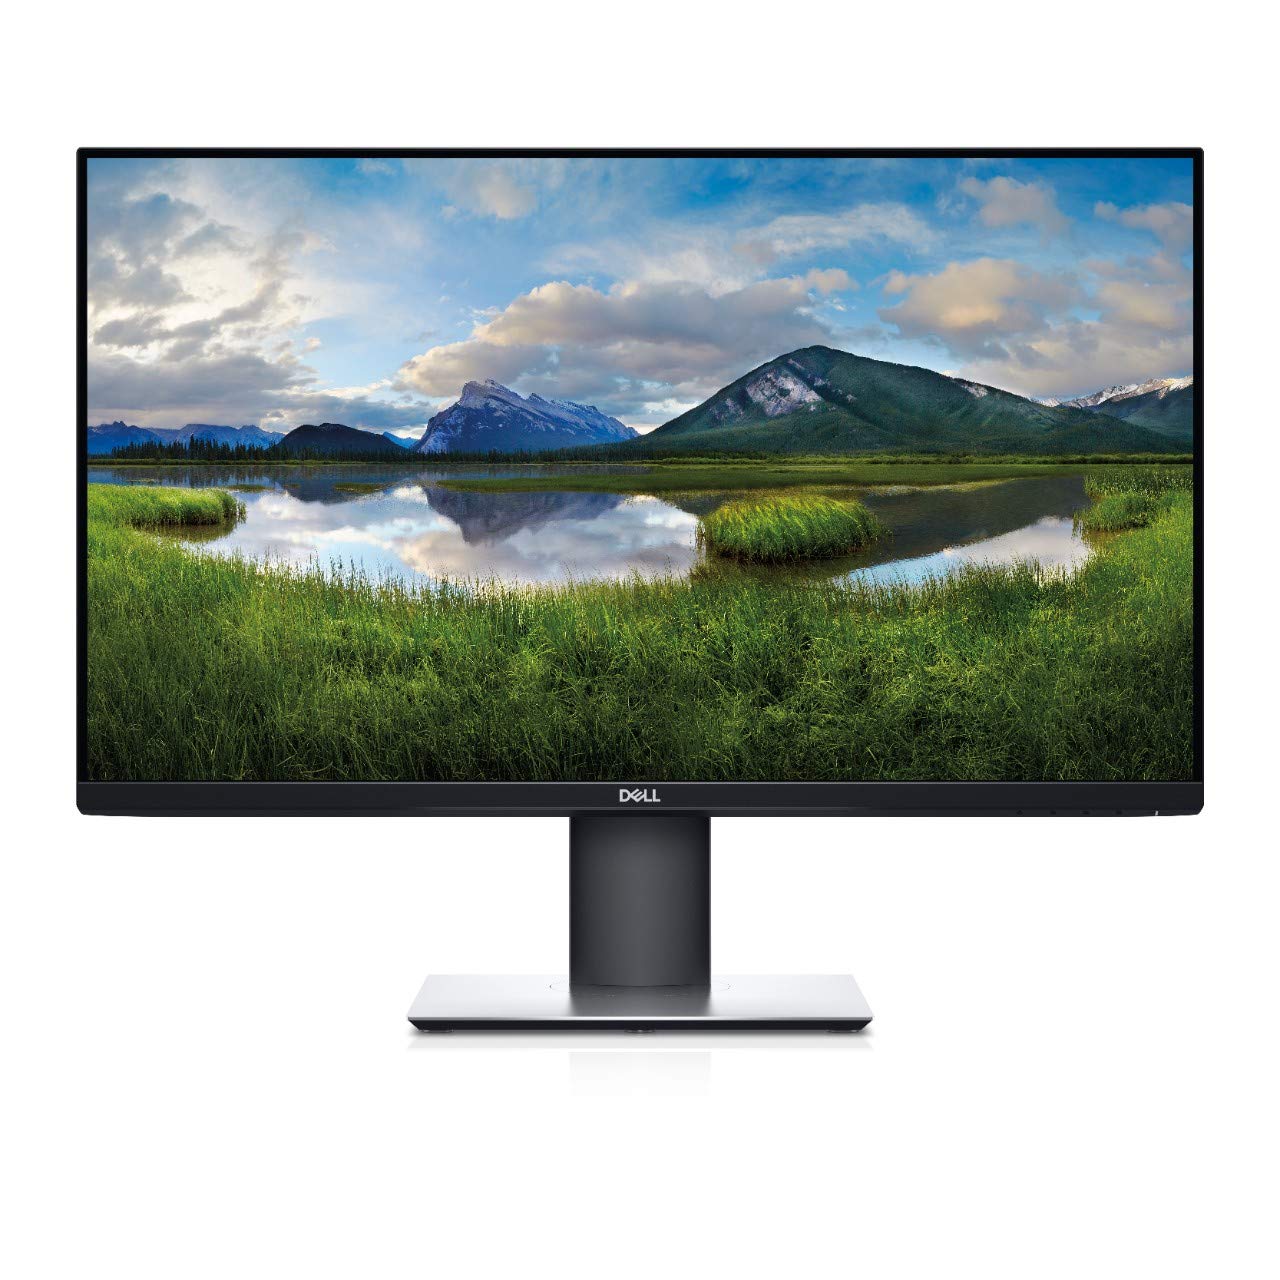 Dell P2179h 27 Inch LED Monitor